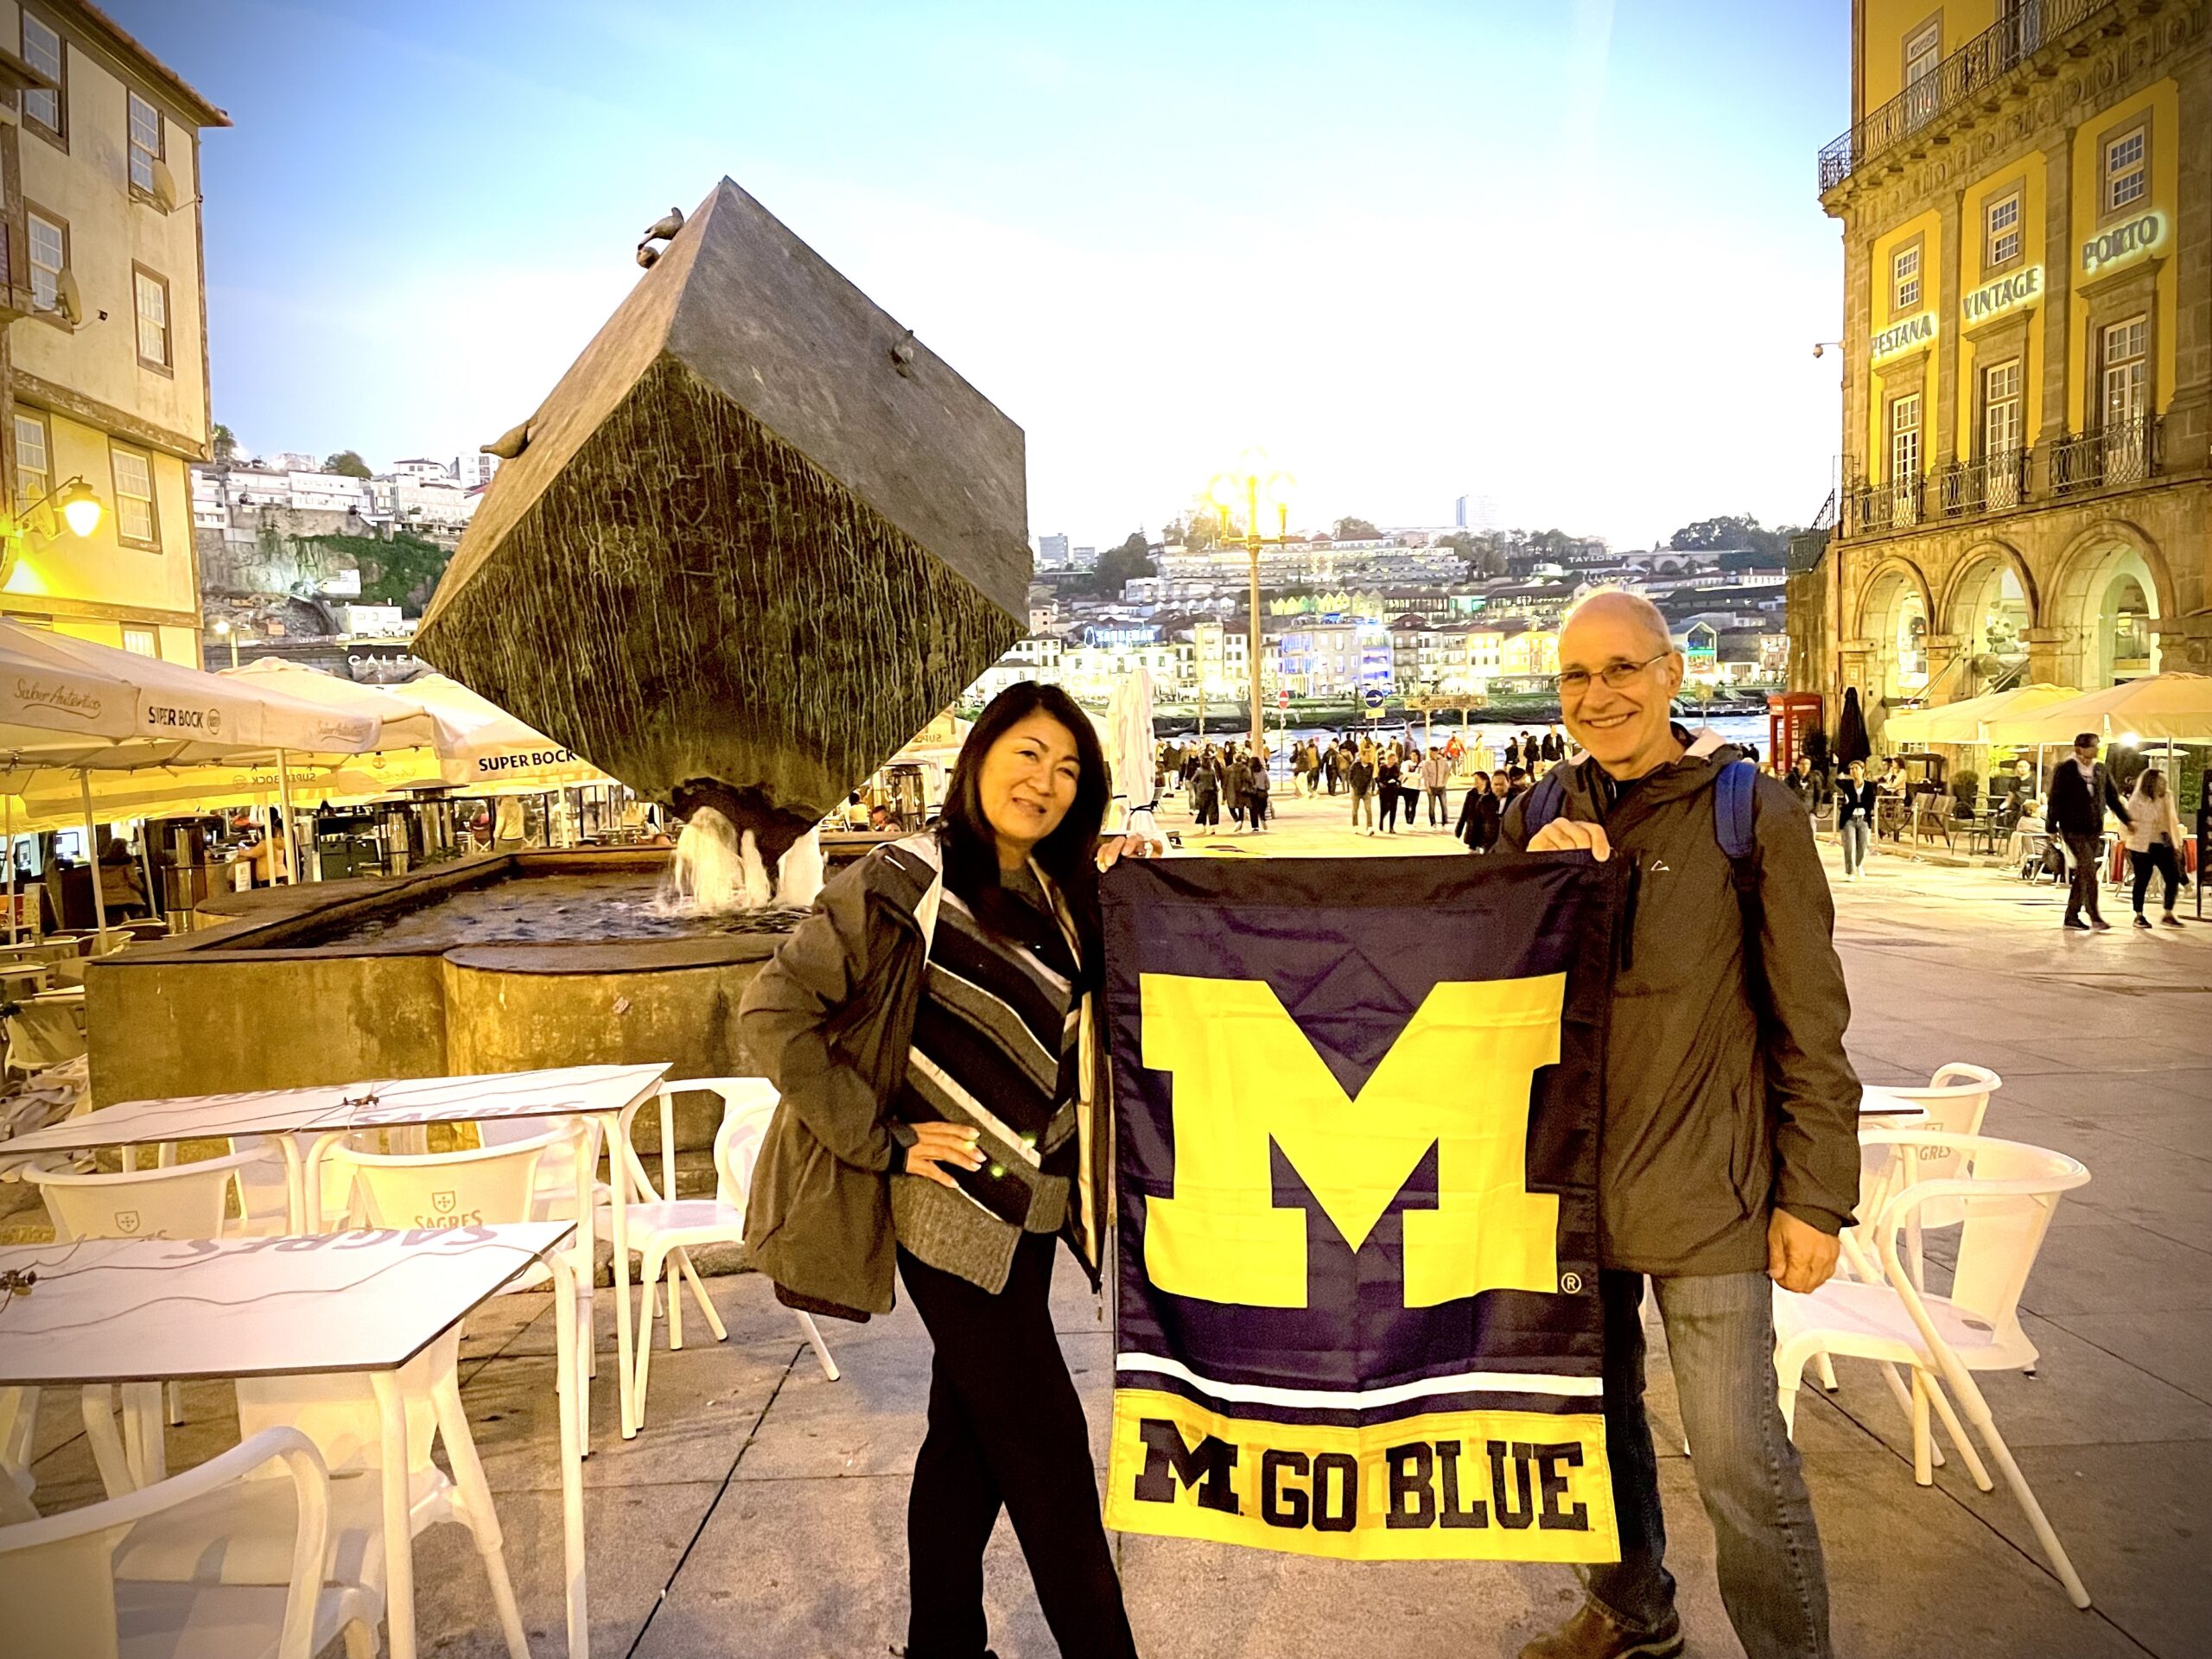 On a November 2022 trip to Porto, Portugal, Alysa Watanabe Sakkas, ’85, and Kosta Sakkas, ’84, spotted what looked like Ann Arbor's “The Cube” sculpture just outside their hotel at Praca da Ribeira. They knew they had to take a photo.